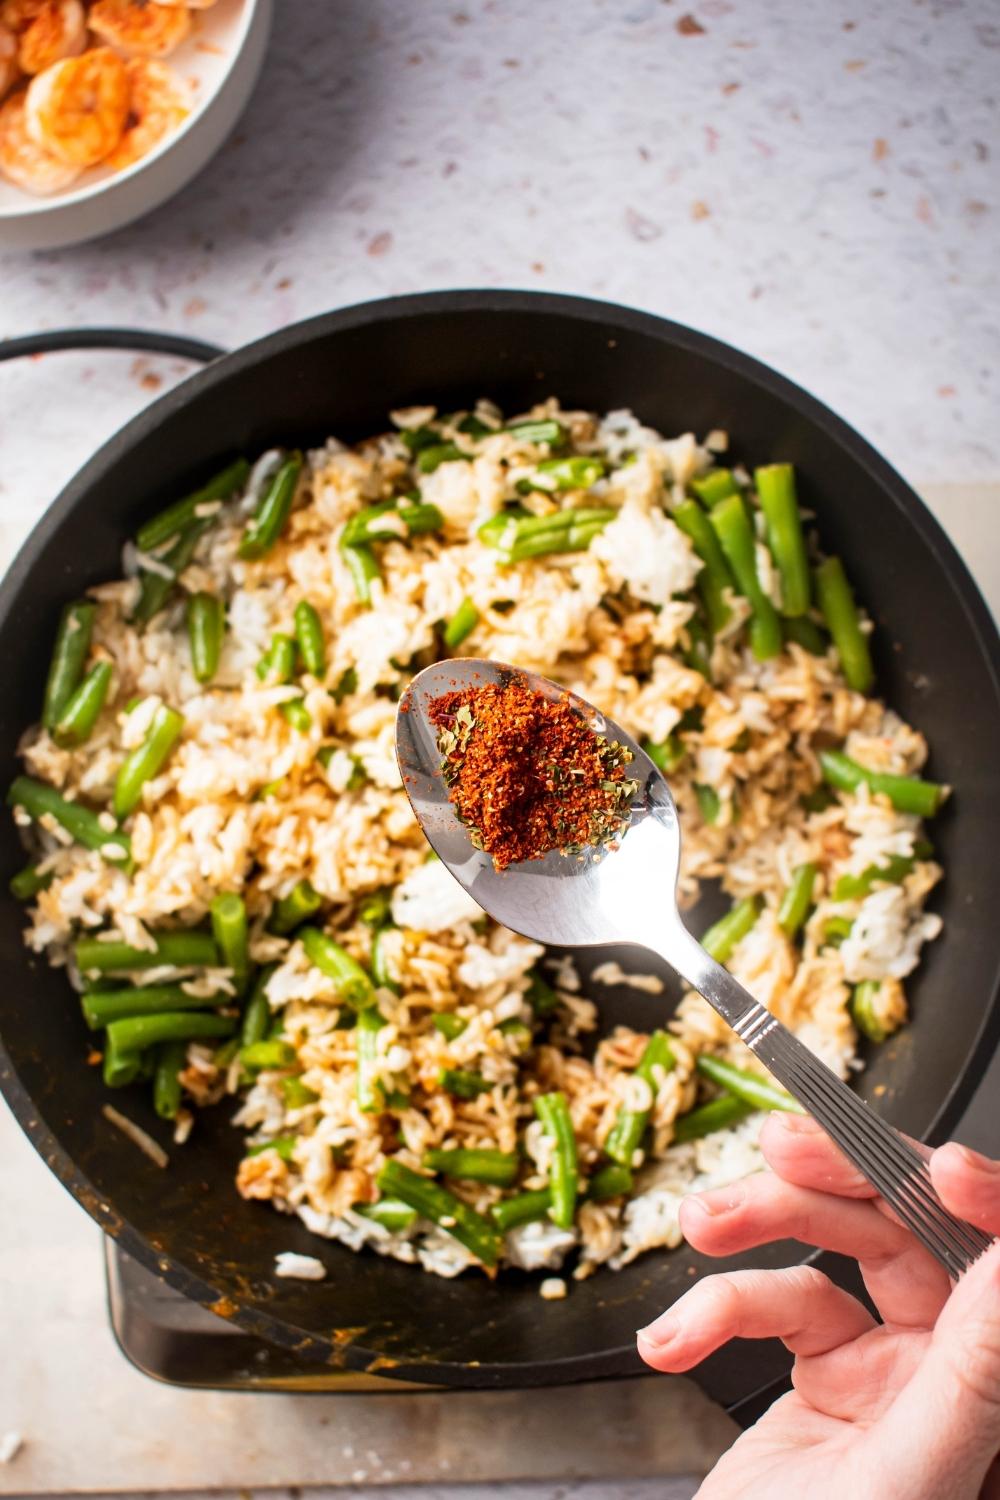 A hand holding a spoon over a skillet filled with rice and cut green beans.